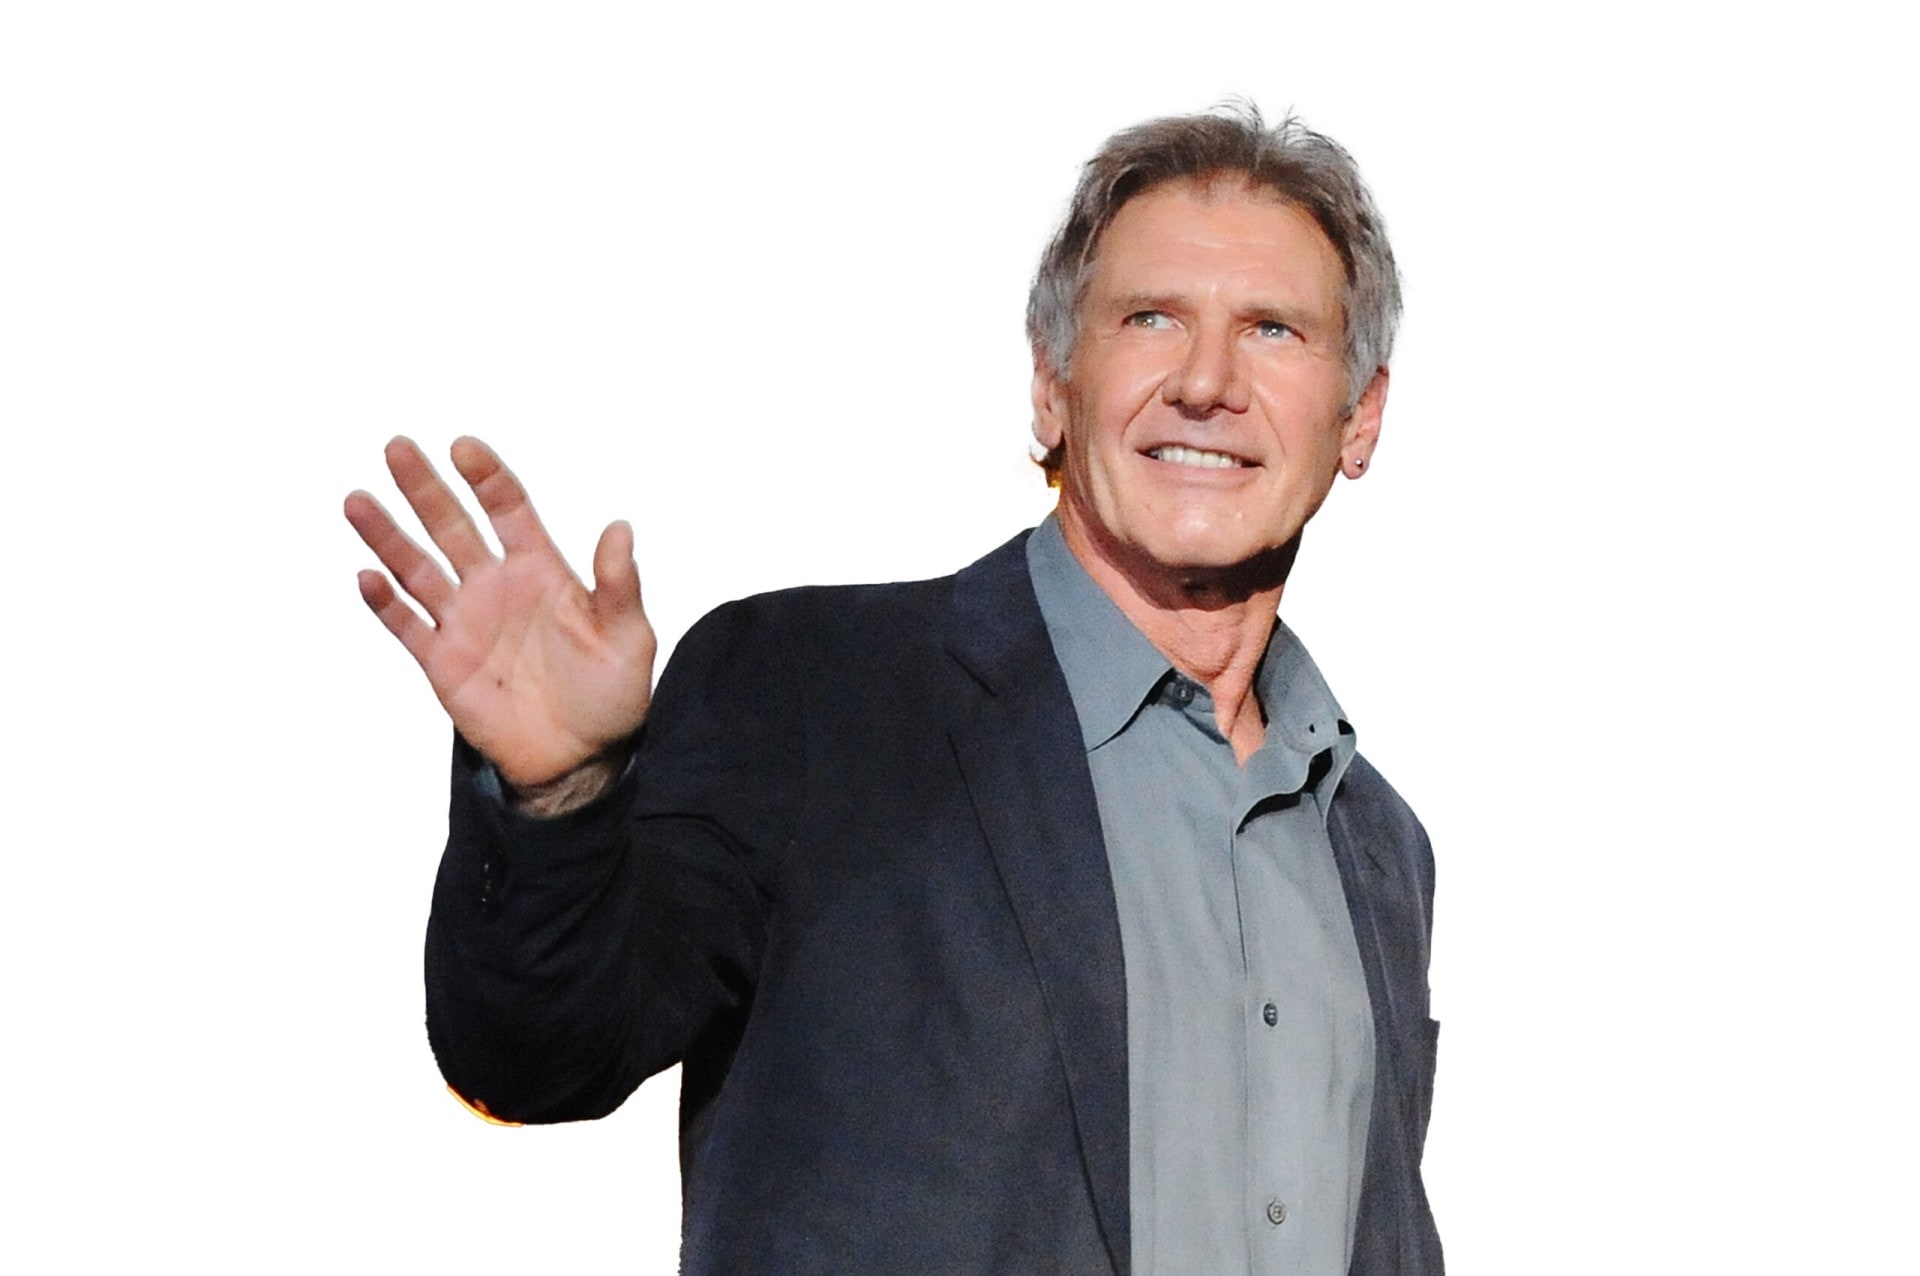 Harrison Ford on white background waving